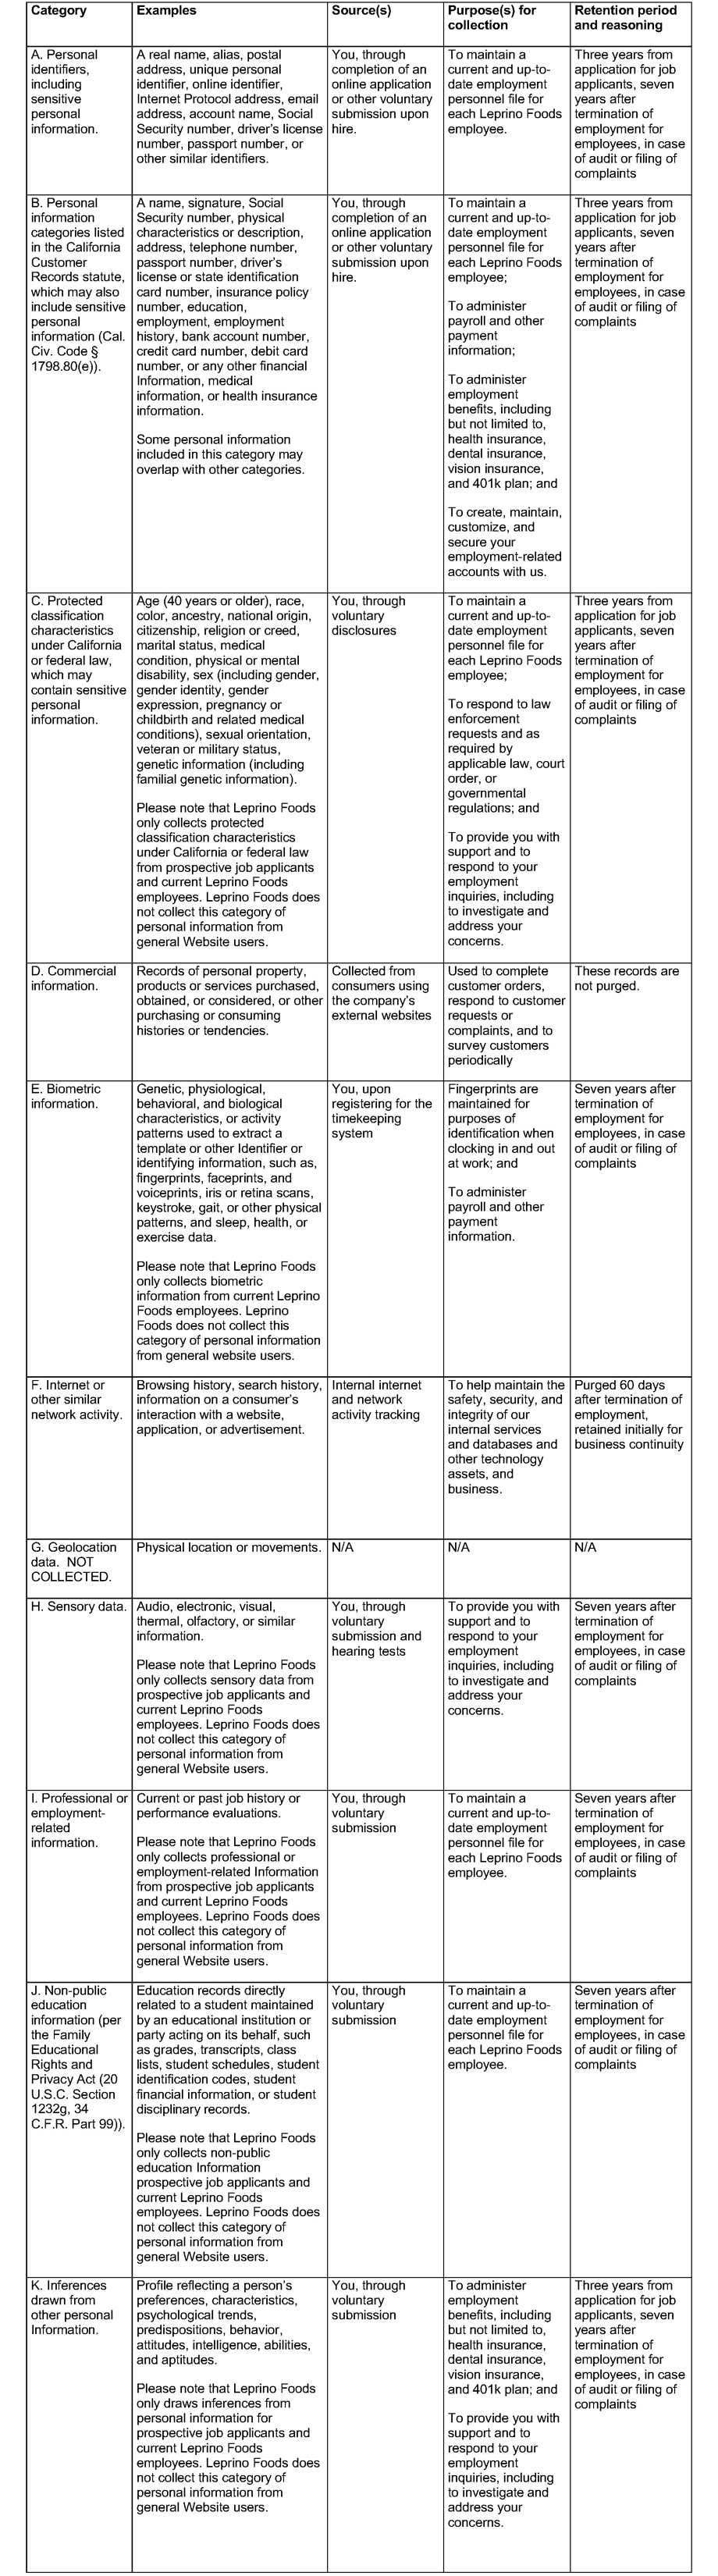 Legal table with categories and examples of potential collected data.